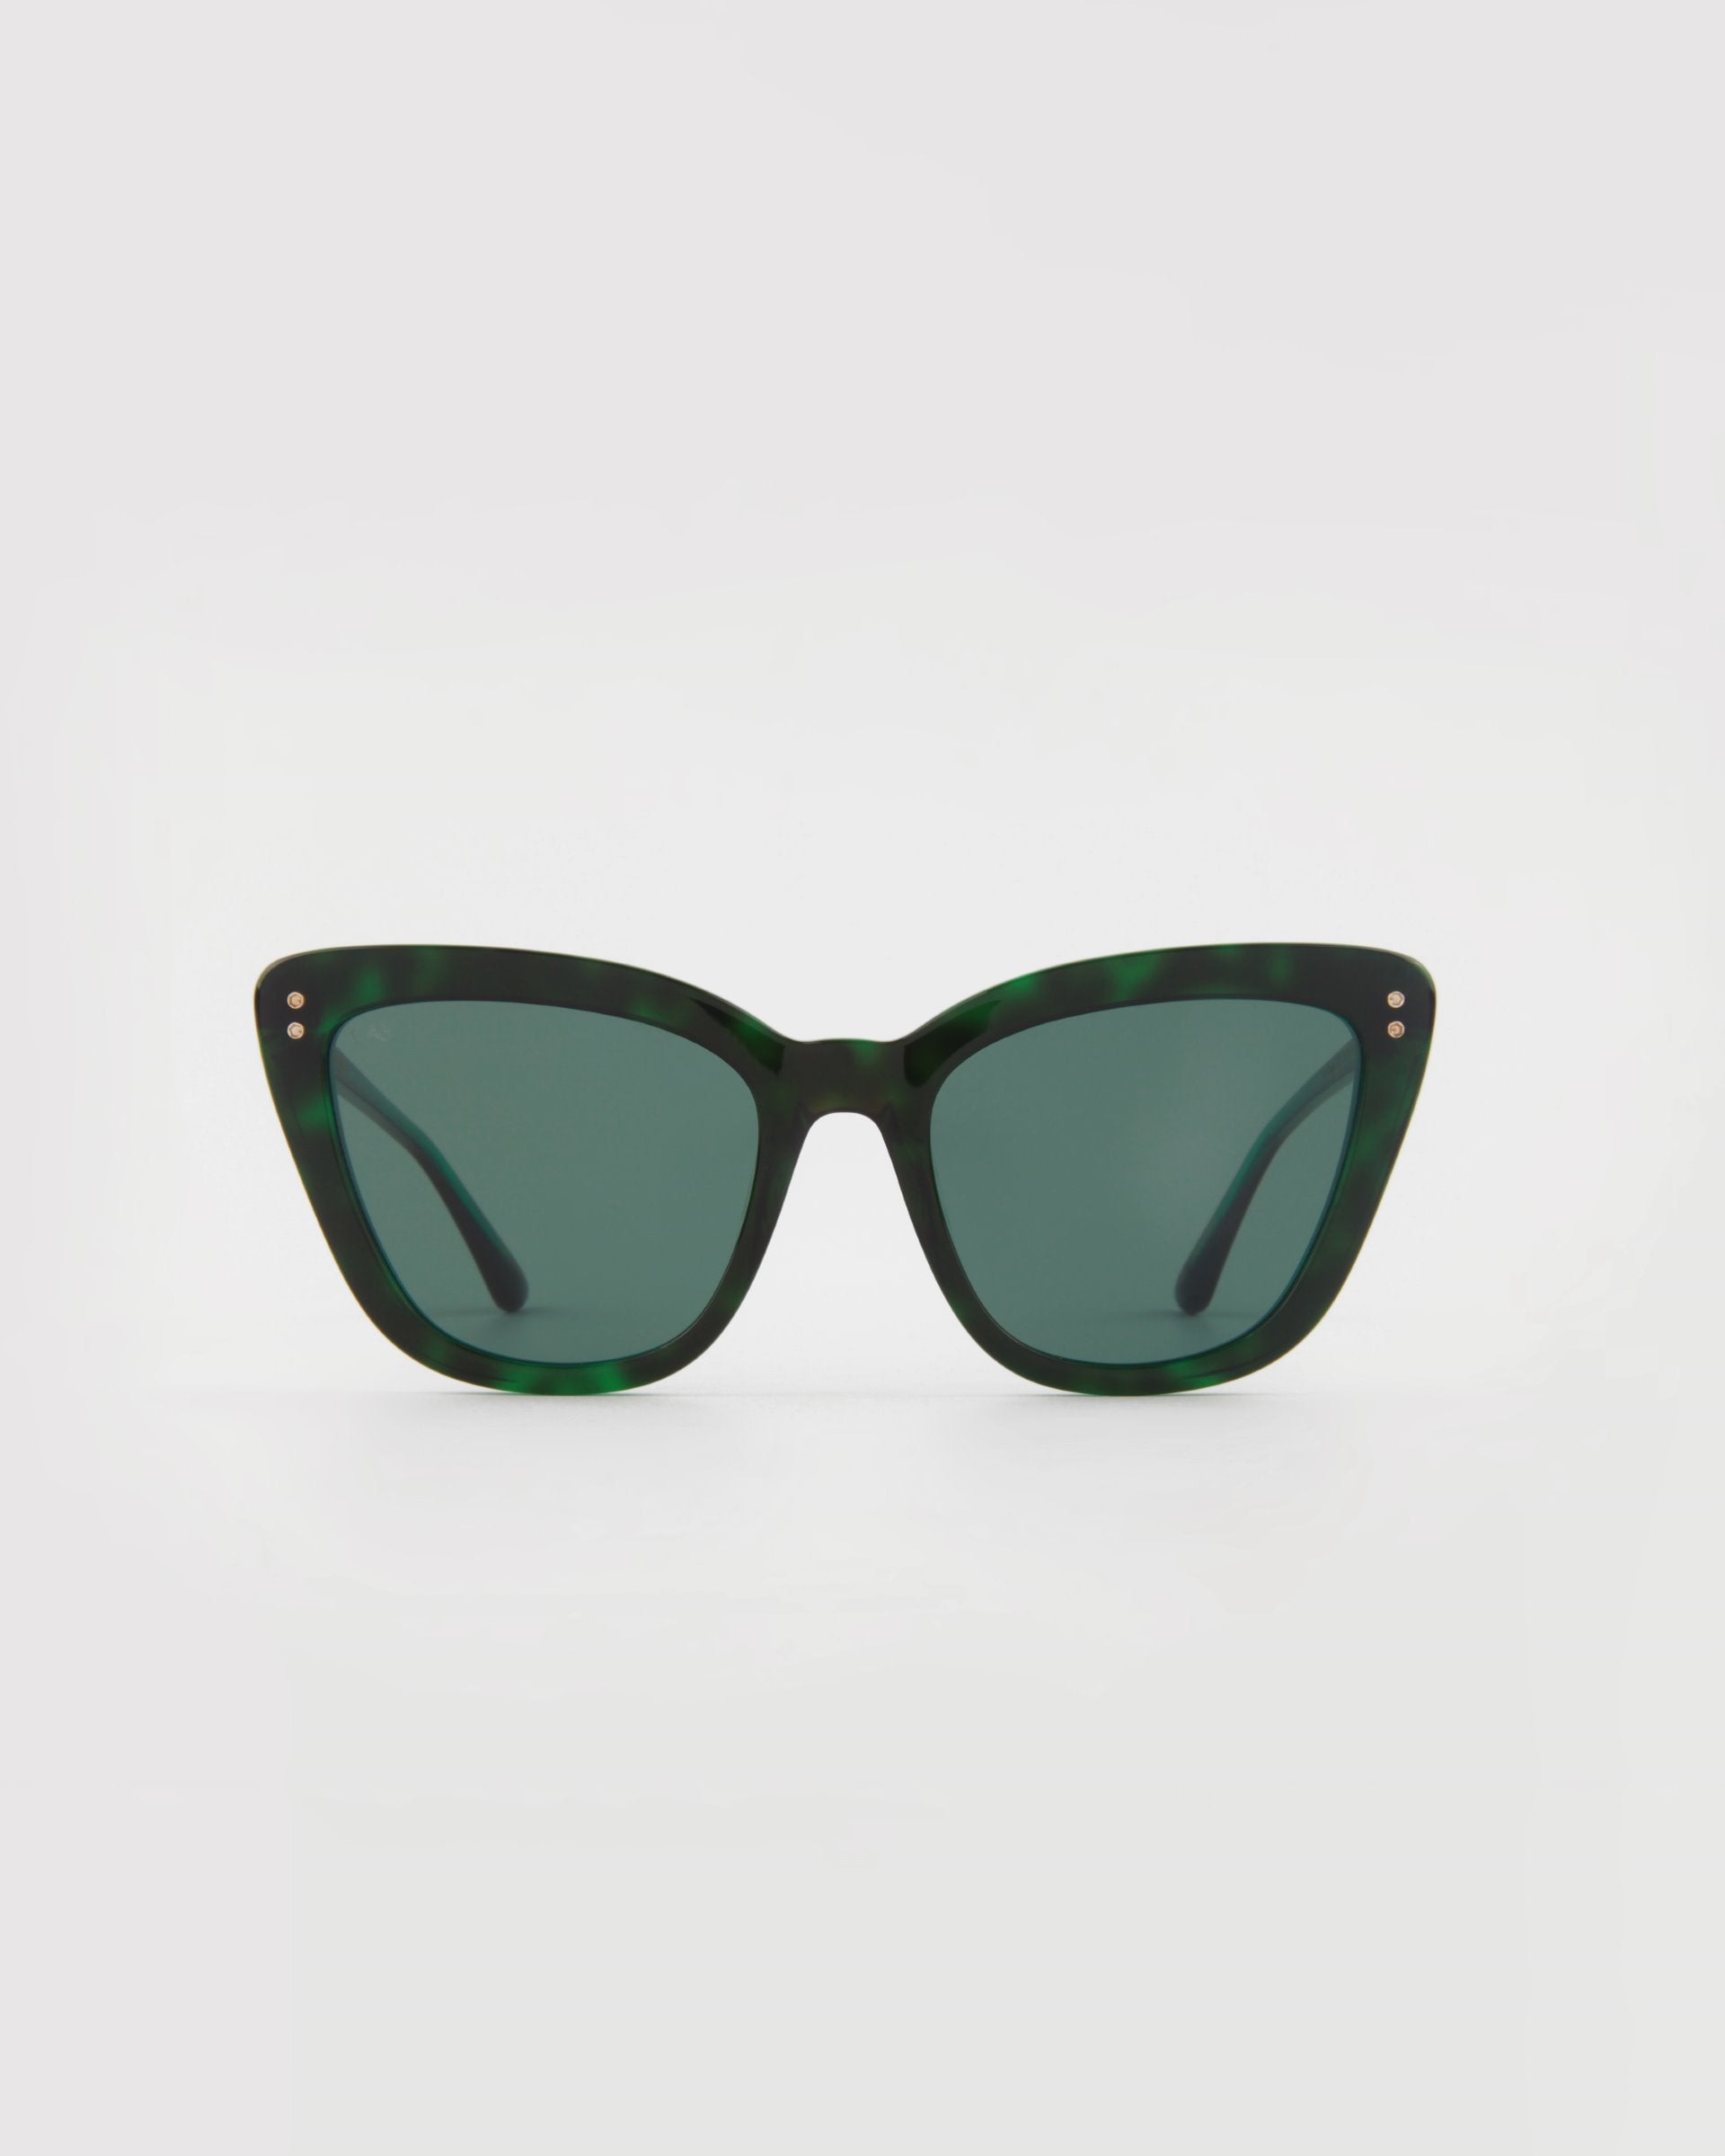 A pair of **Ice Cream by For Art&#39;s Sake®** sunglasses with cat-eye frames in dark green tortoiseshell and dark lenses is centered against a plain, light background. The glasses have a slight upturn at the outer corners, metal accents near the hinges, and offer UVA &amp; UVB protection.